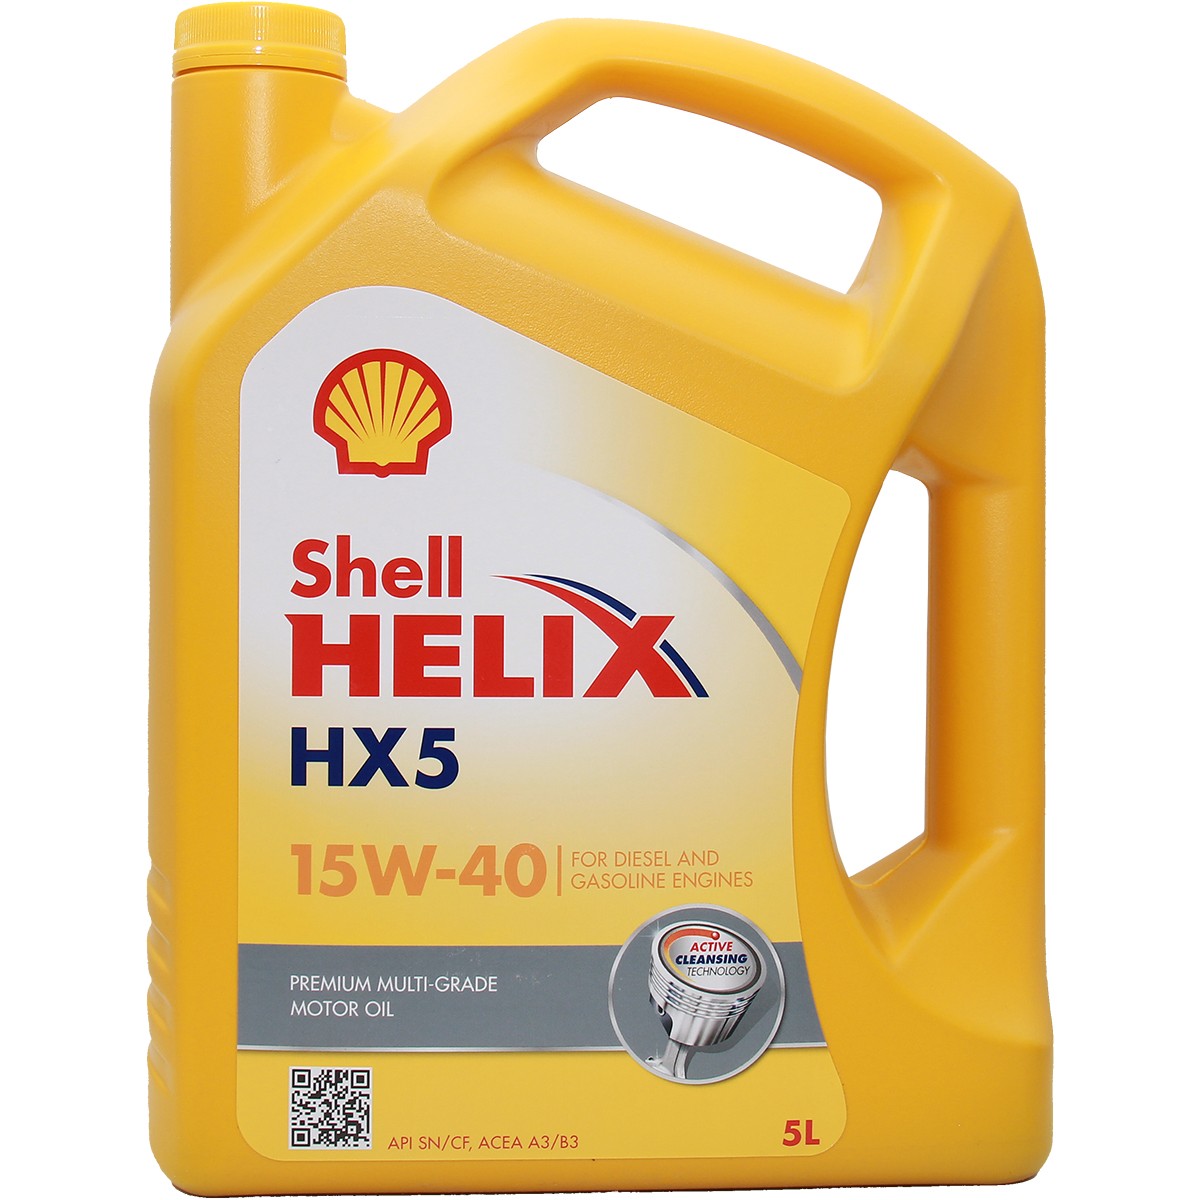 Engine oil SHELL 15W-40, 5l, Mineral Oil longlife 550039863